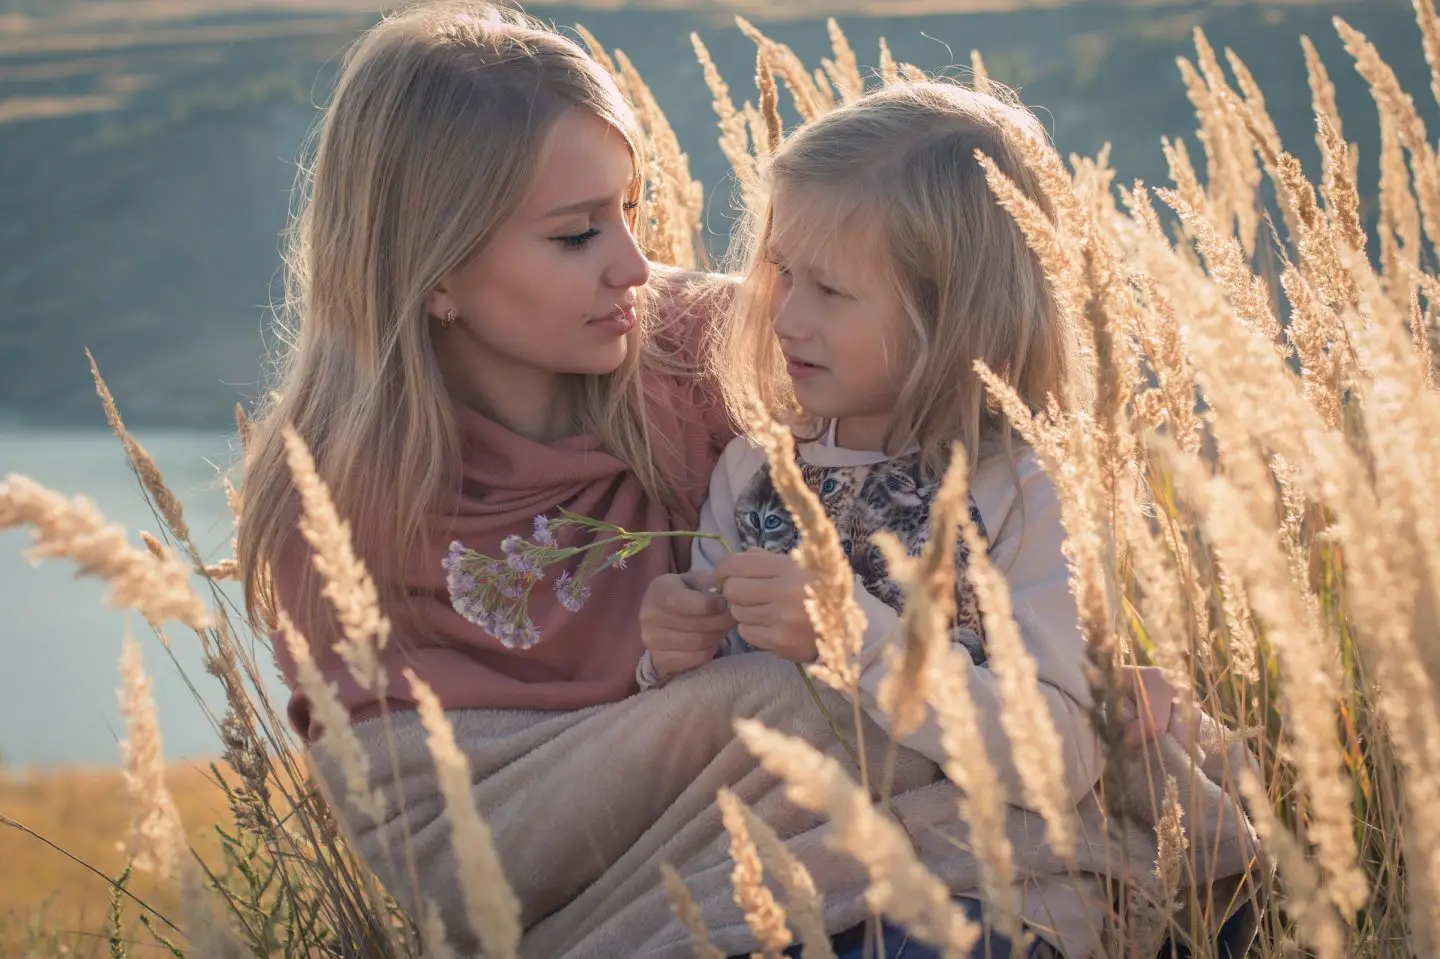 A mother and daughter sit amongst some wheat in golden light